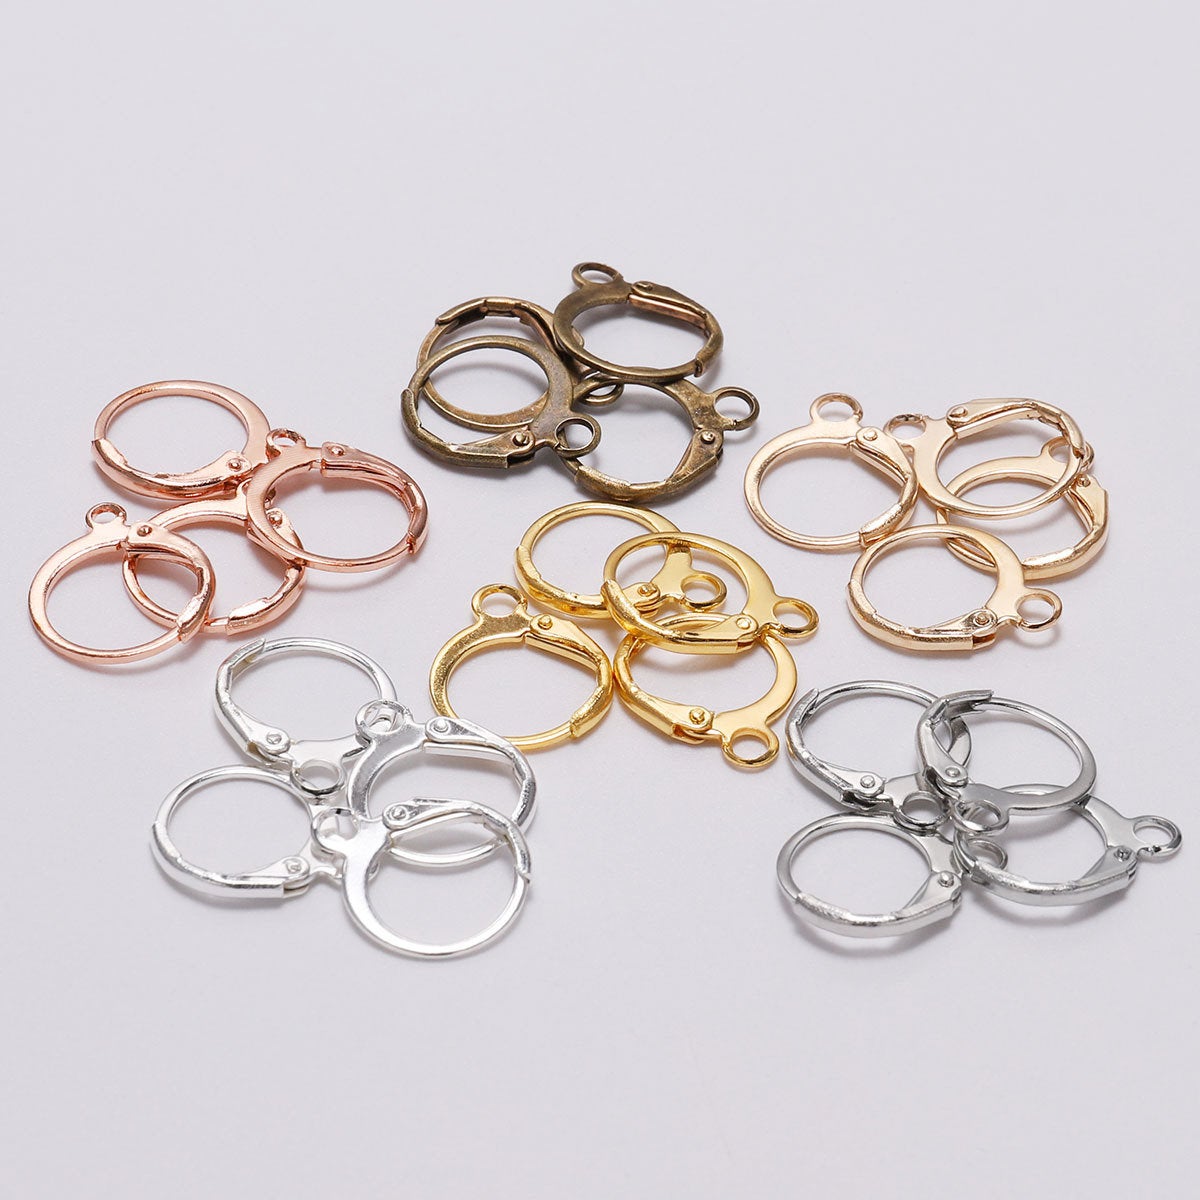  GG 50pcs/lot Stainless Steel Rose Gold Silver Earring Hooks  Earrings Clasps Findings Earring Wires for Jewelry Making Supplies DIY  T1124 (Color : Steel 17x15mm)